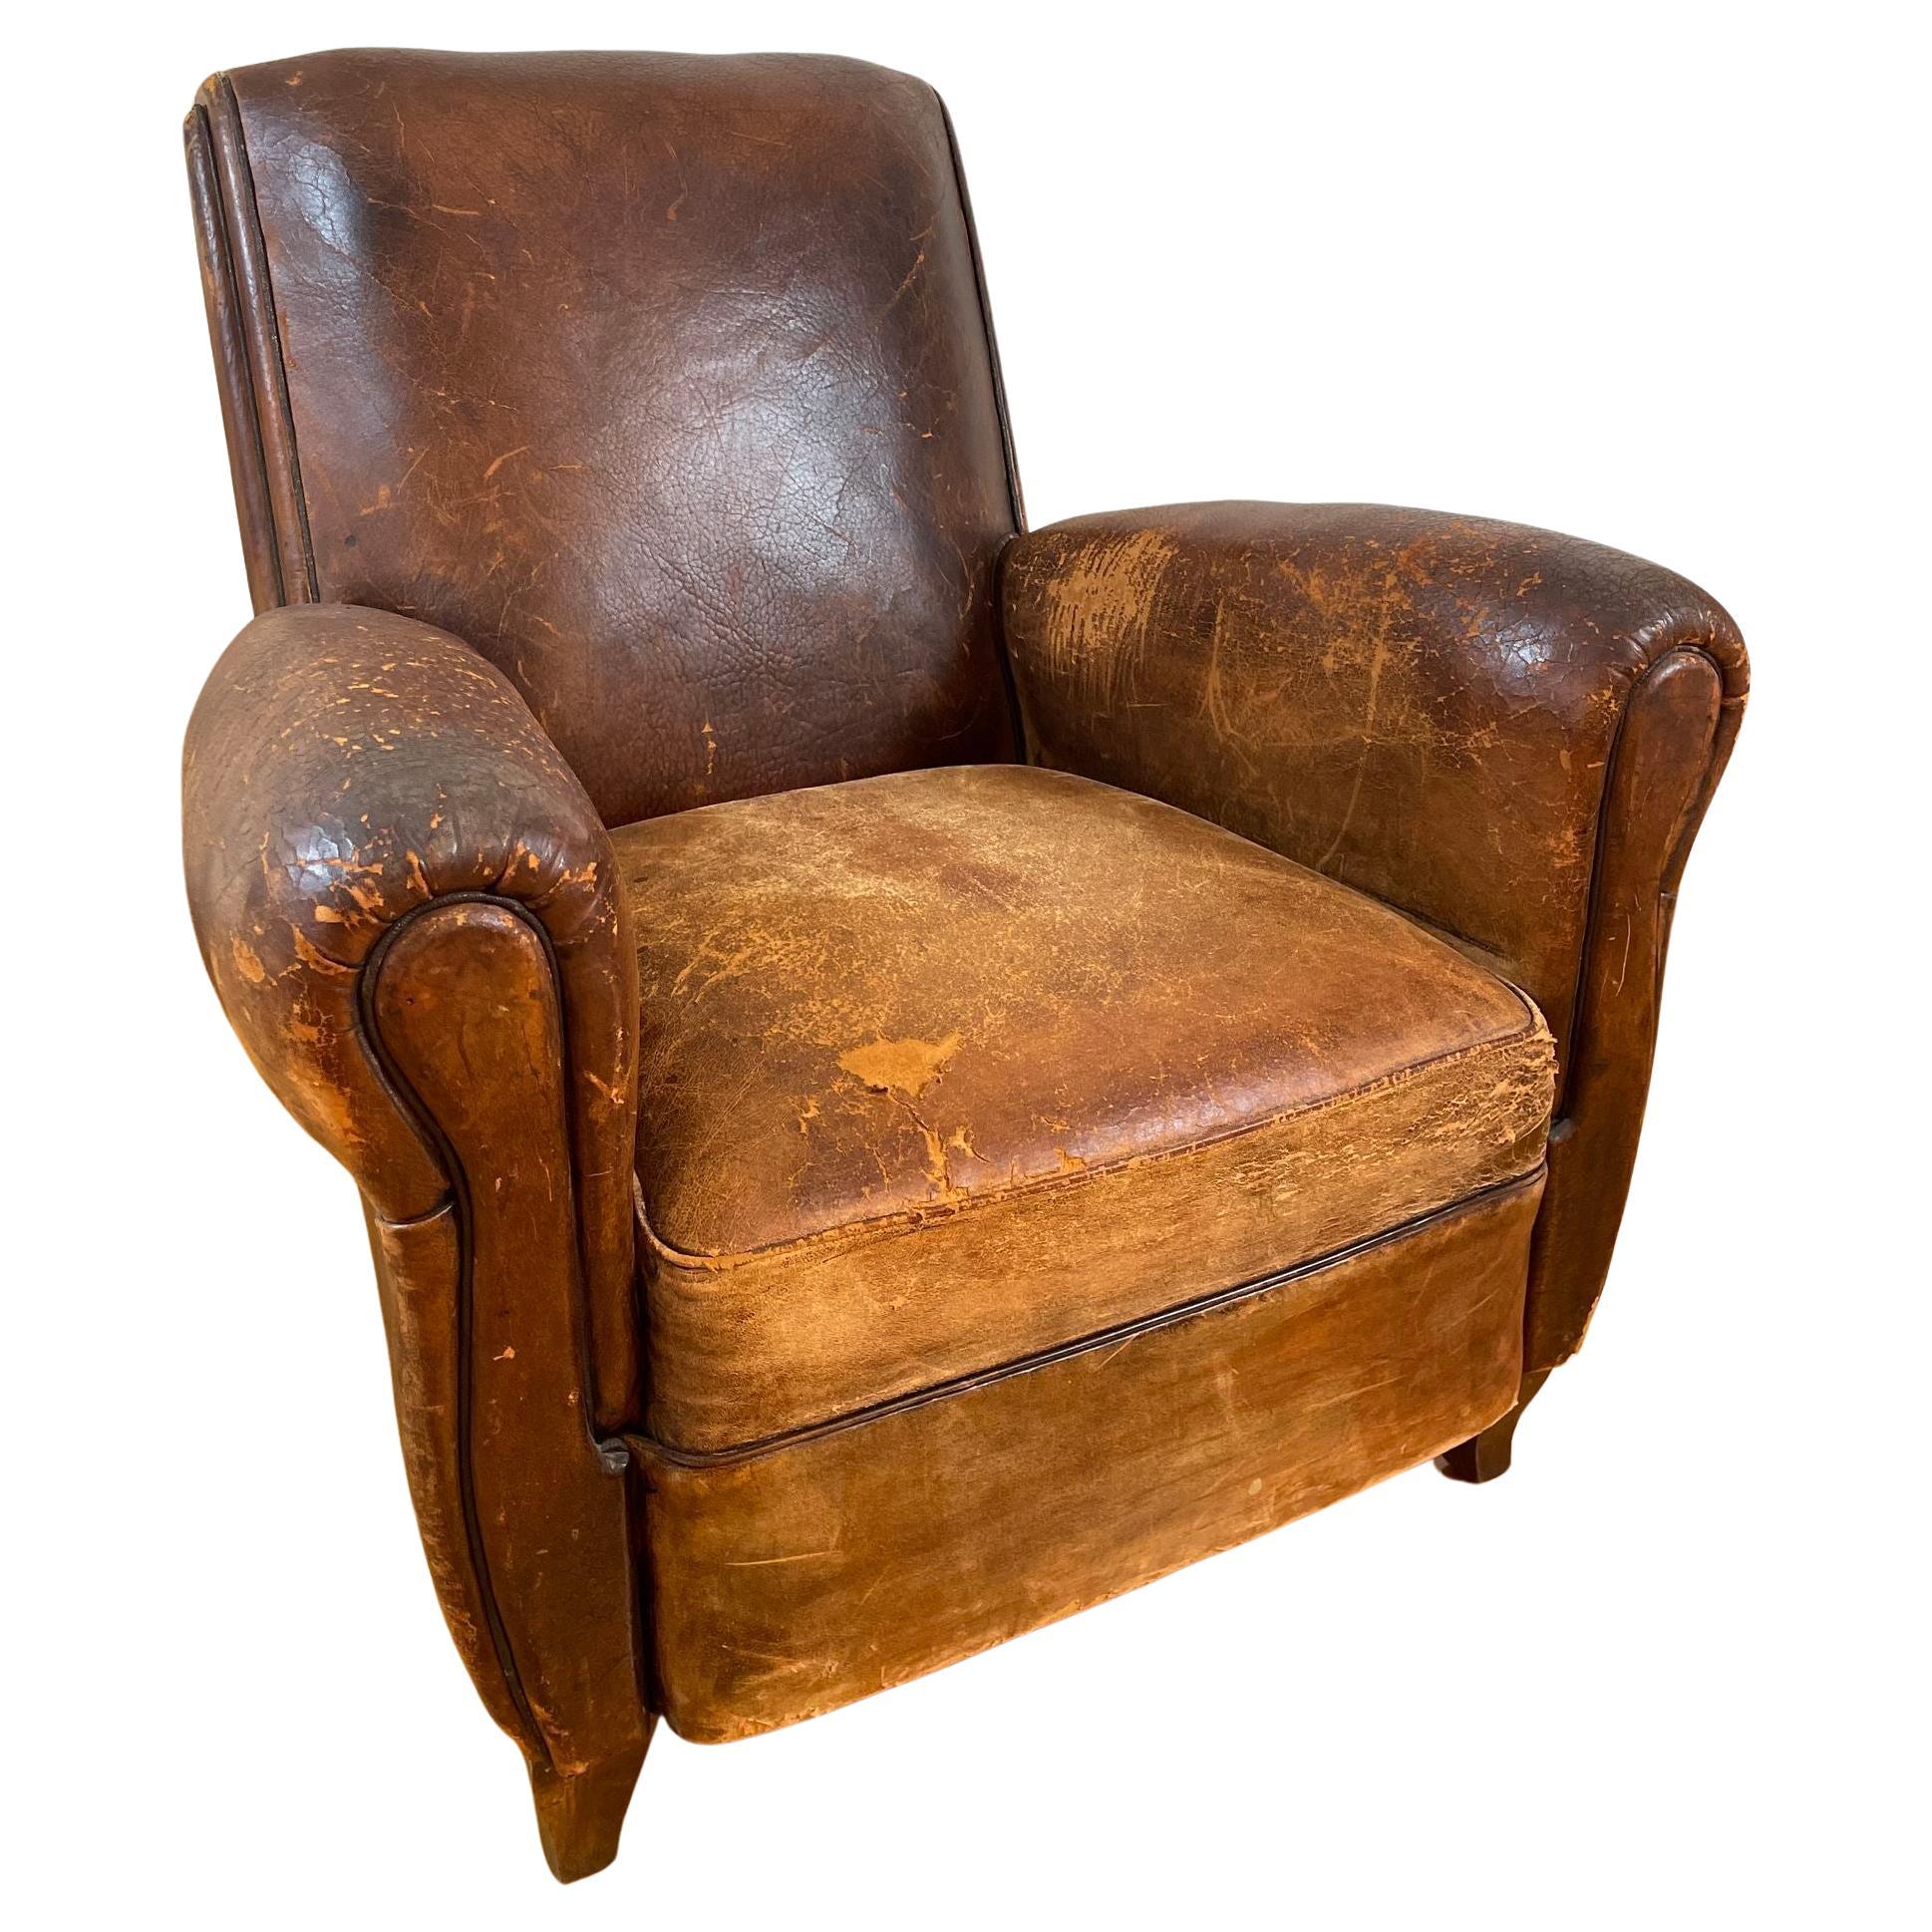 Antique 1930s French Leather Club Chair Distressed